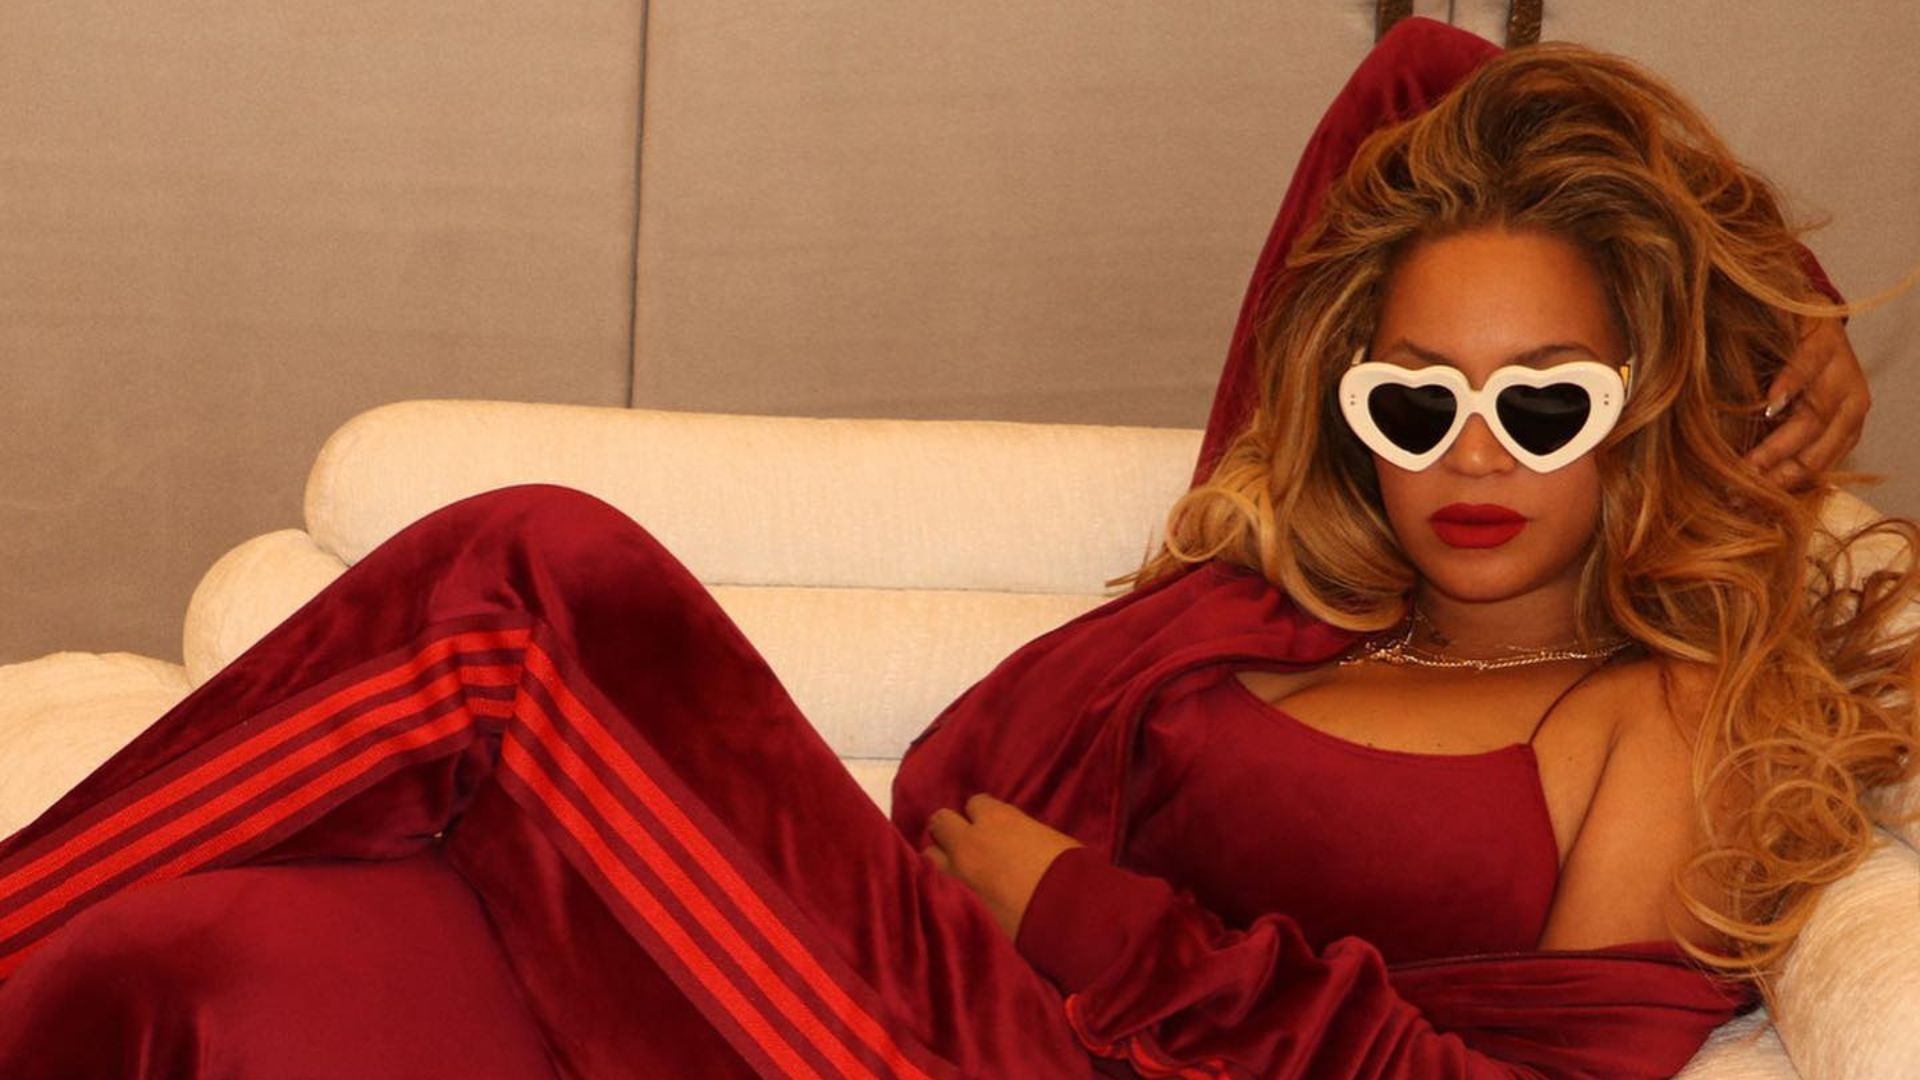 Beyoncé and adidas Mutually Part Ways, According to Reports